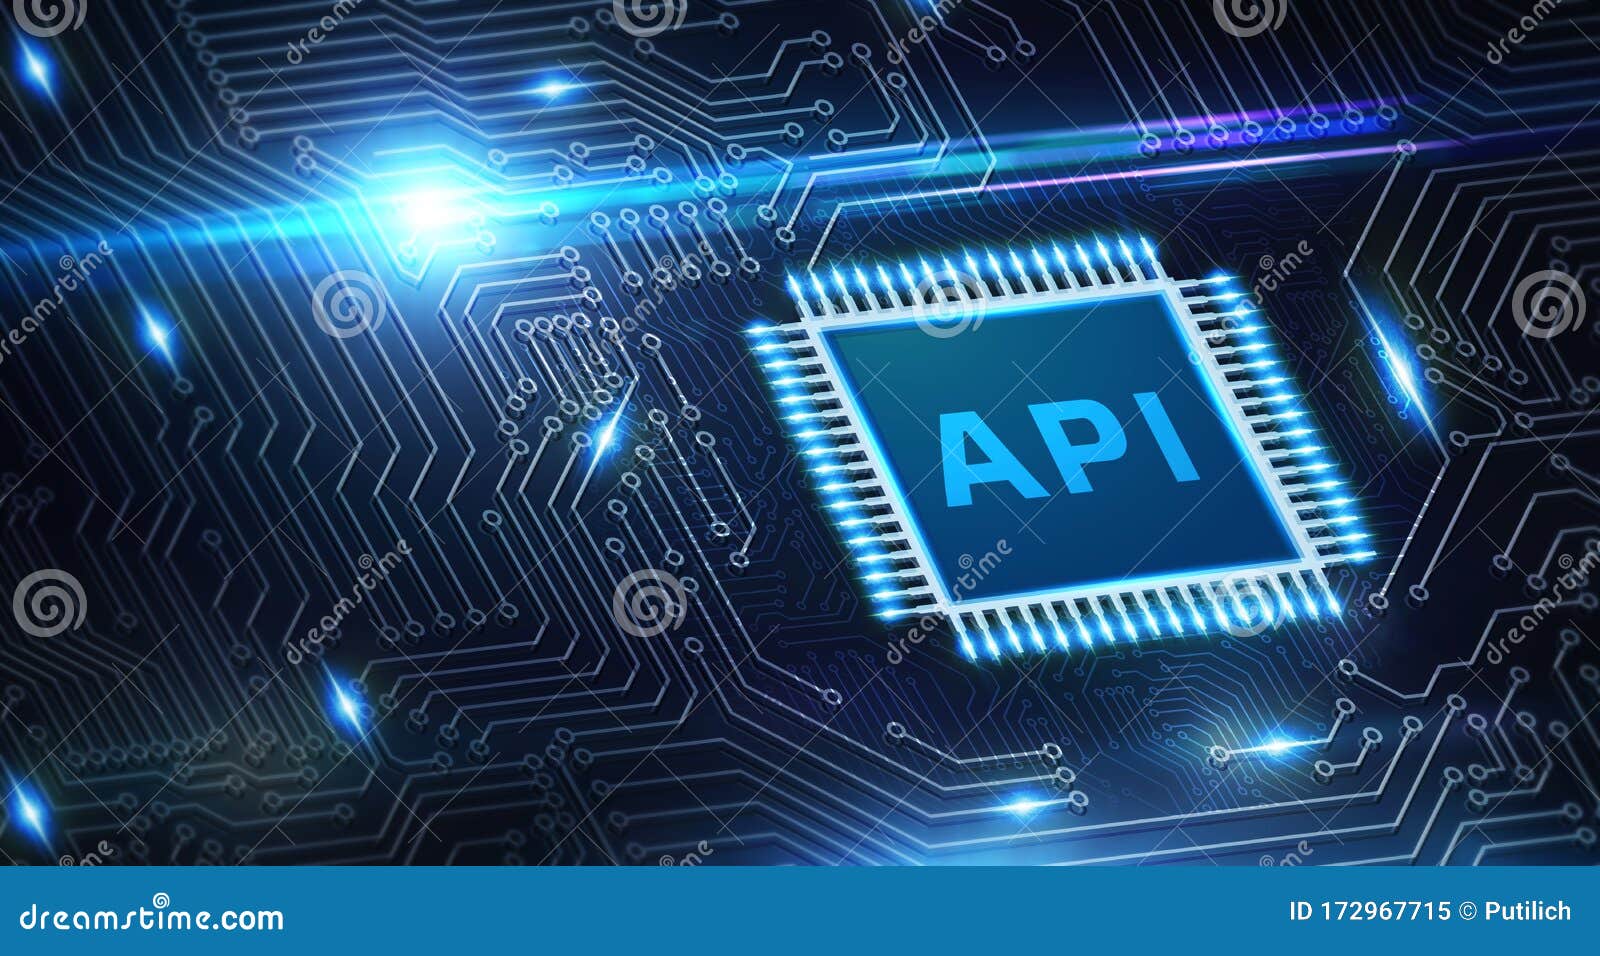 api - application programming interface. software development tool. business, modern technology, internet and networking concept